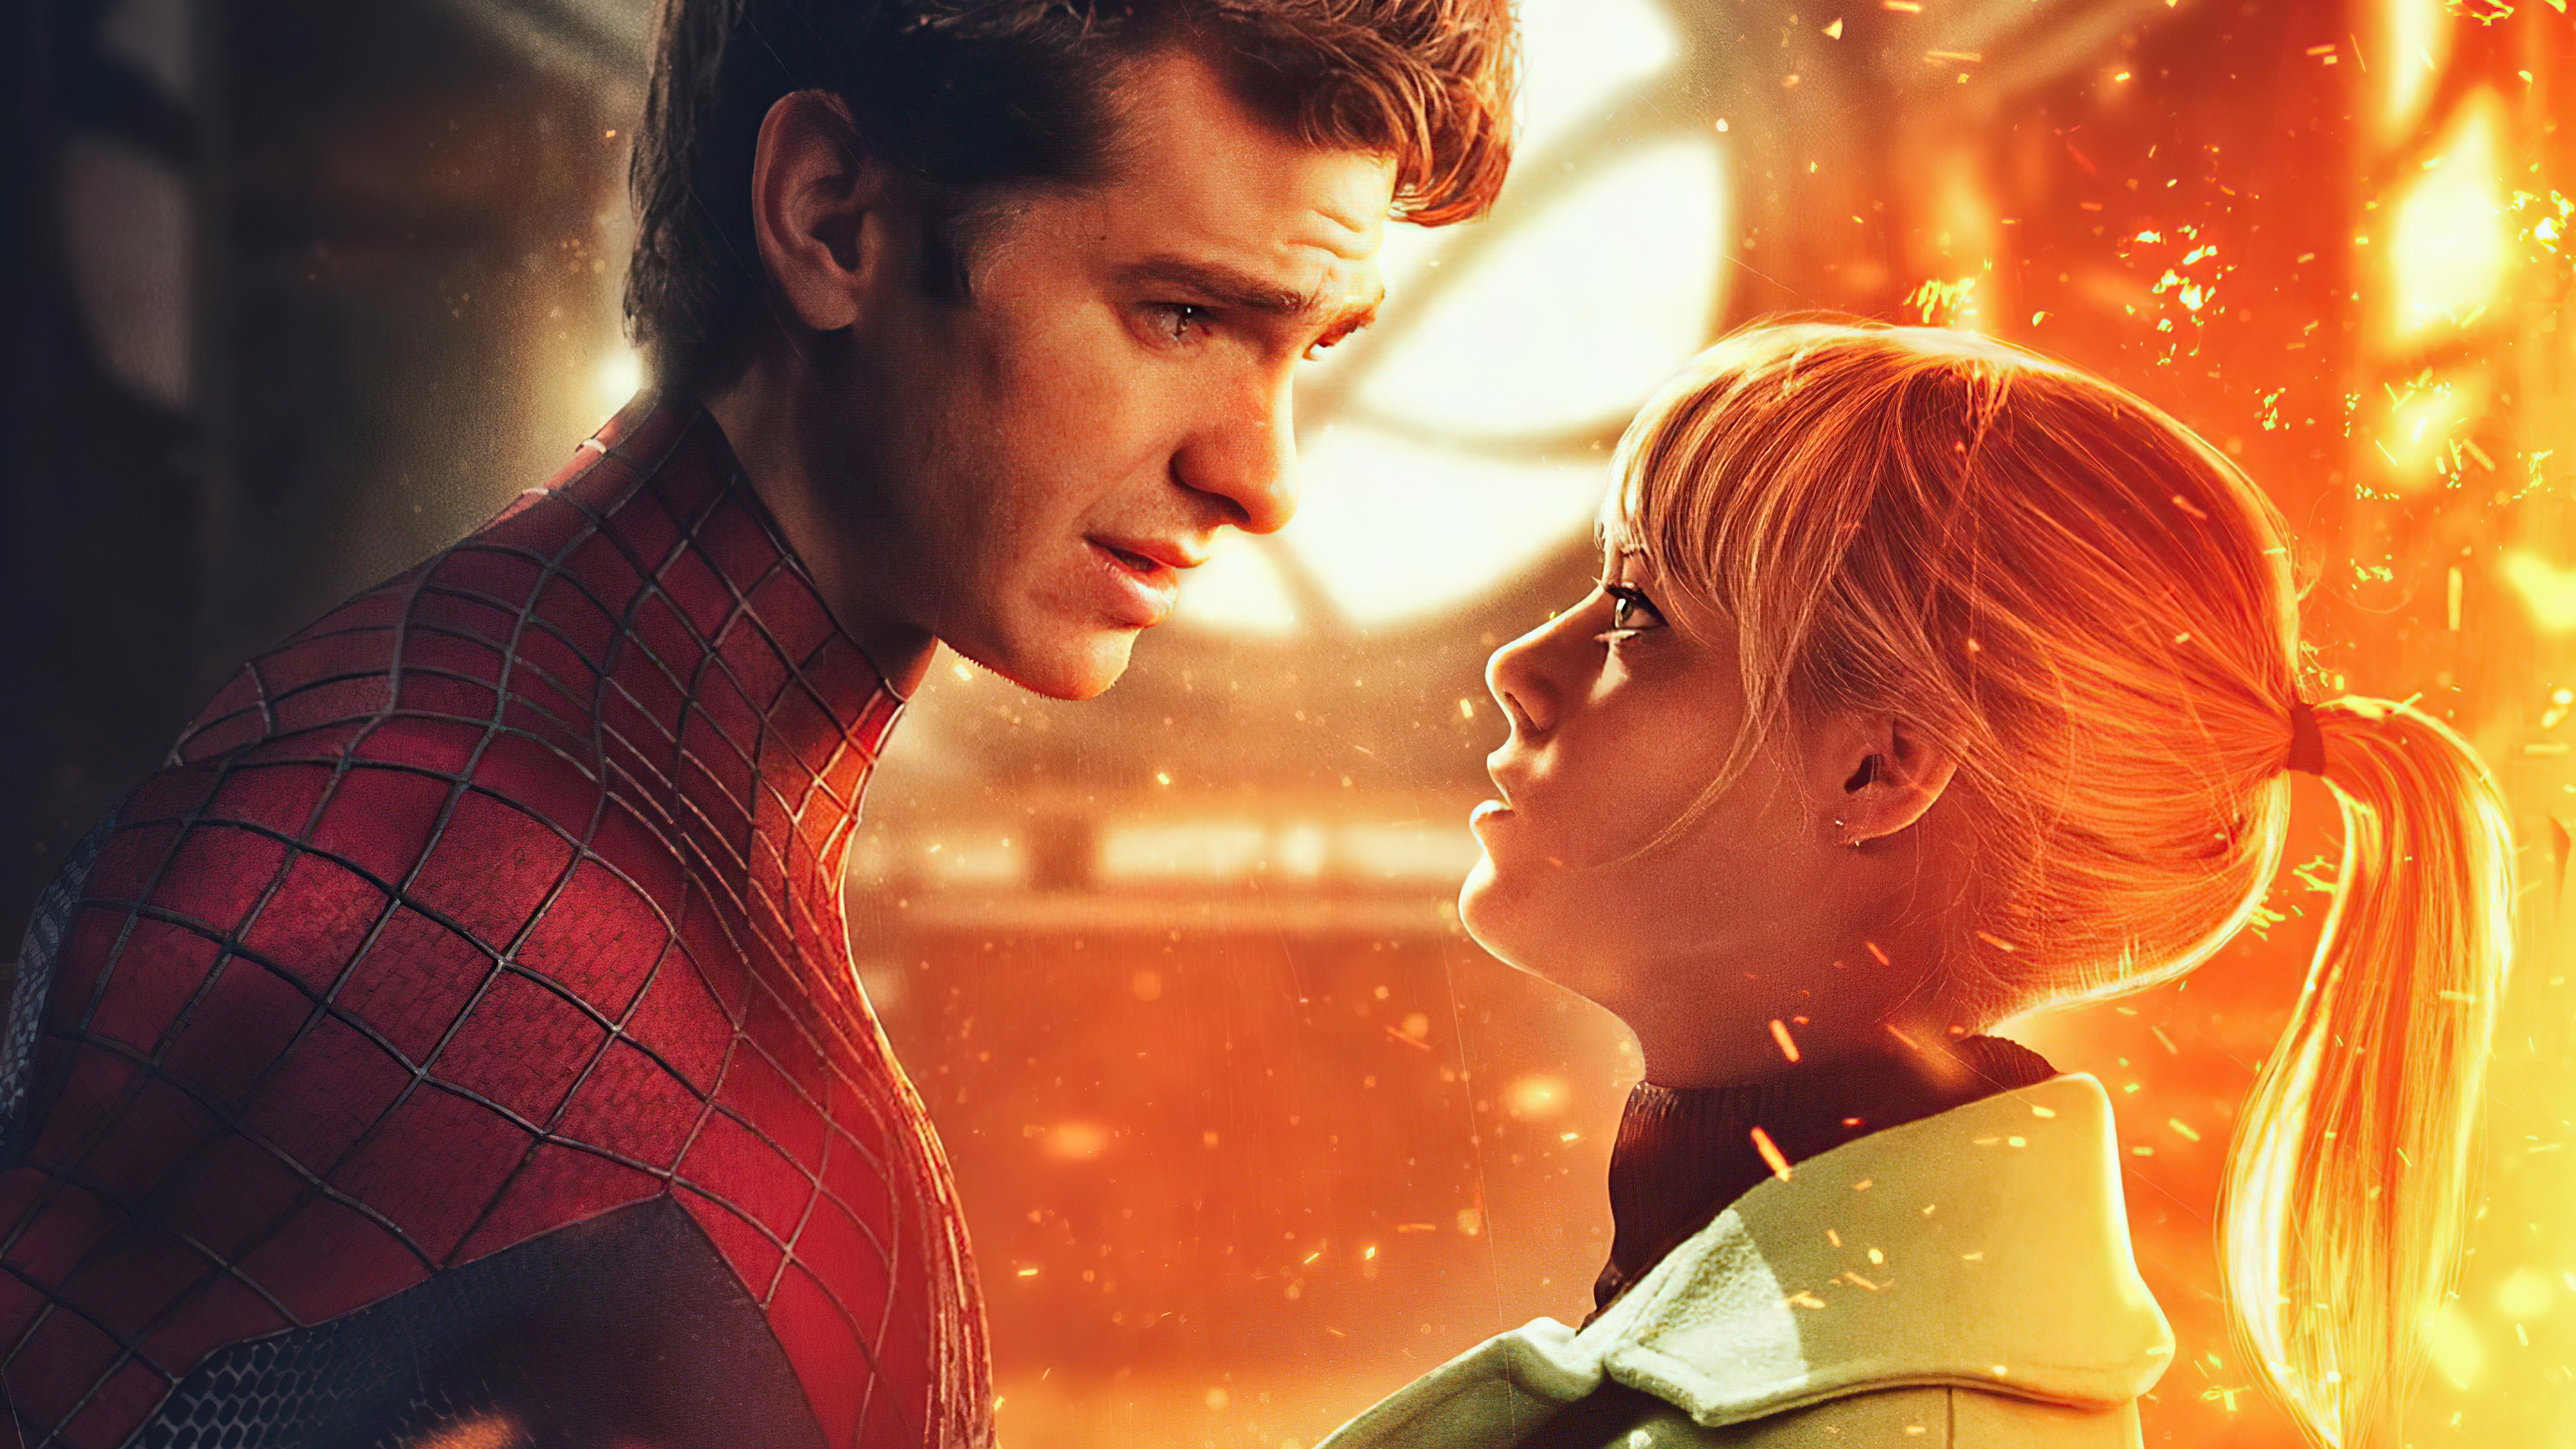 The amazing spiderman andrew and emma stone hd movies k wallpapers images backgrounds photos and pictures